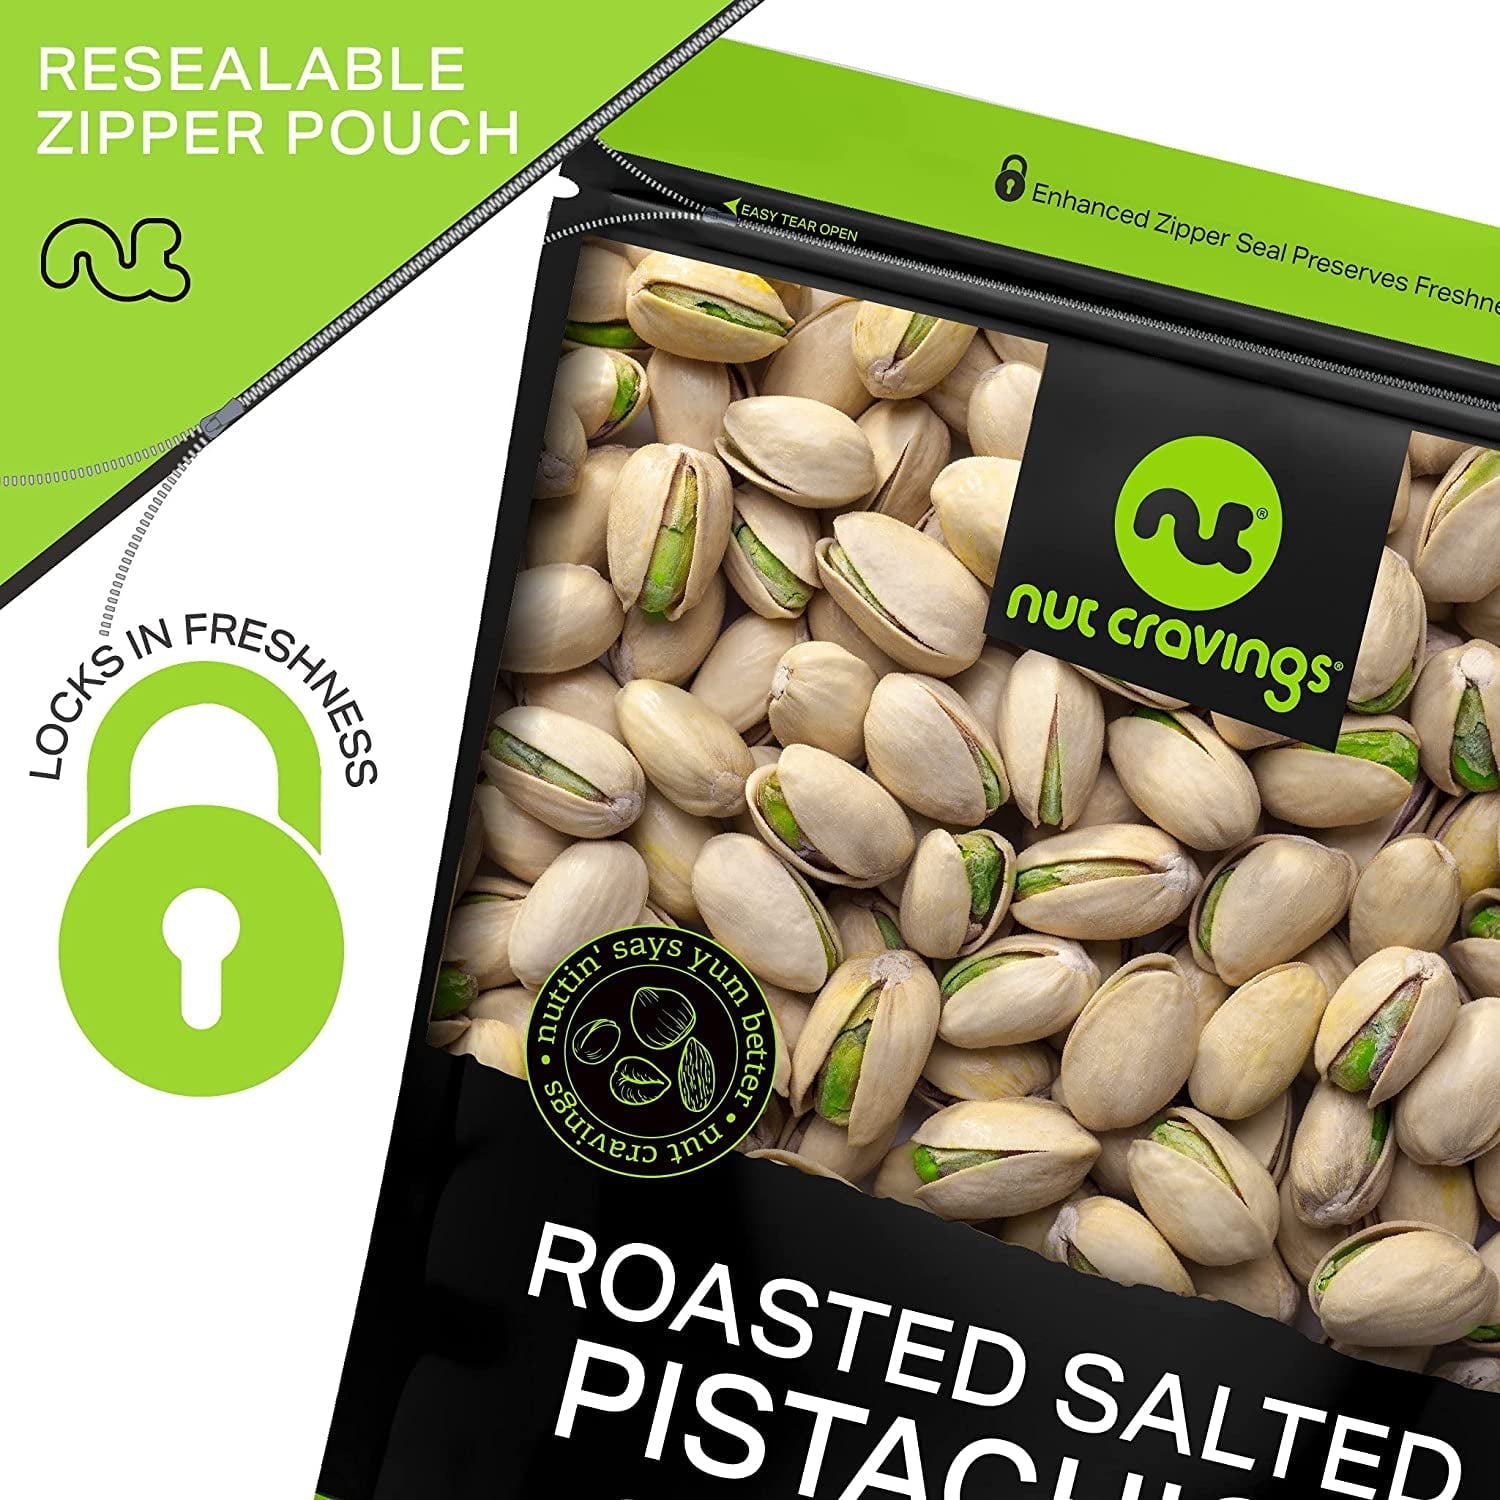 Wholesale prices with free shipping all over United States Freshly Roasted & Salted California Pistachios (16oz - 1 LB) Packed Fresh in Resealable Bag - Steven Deals